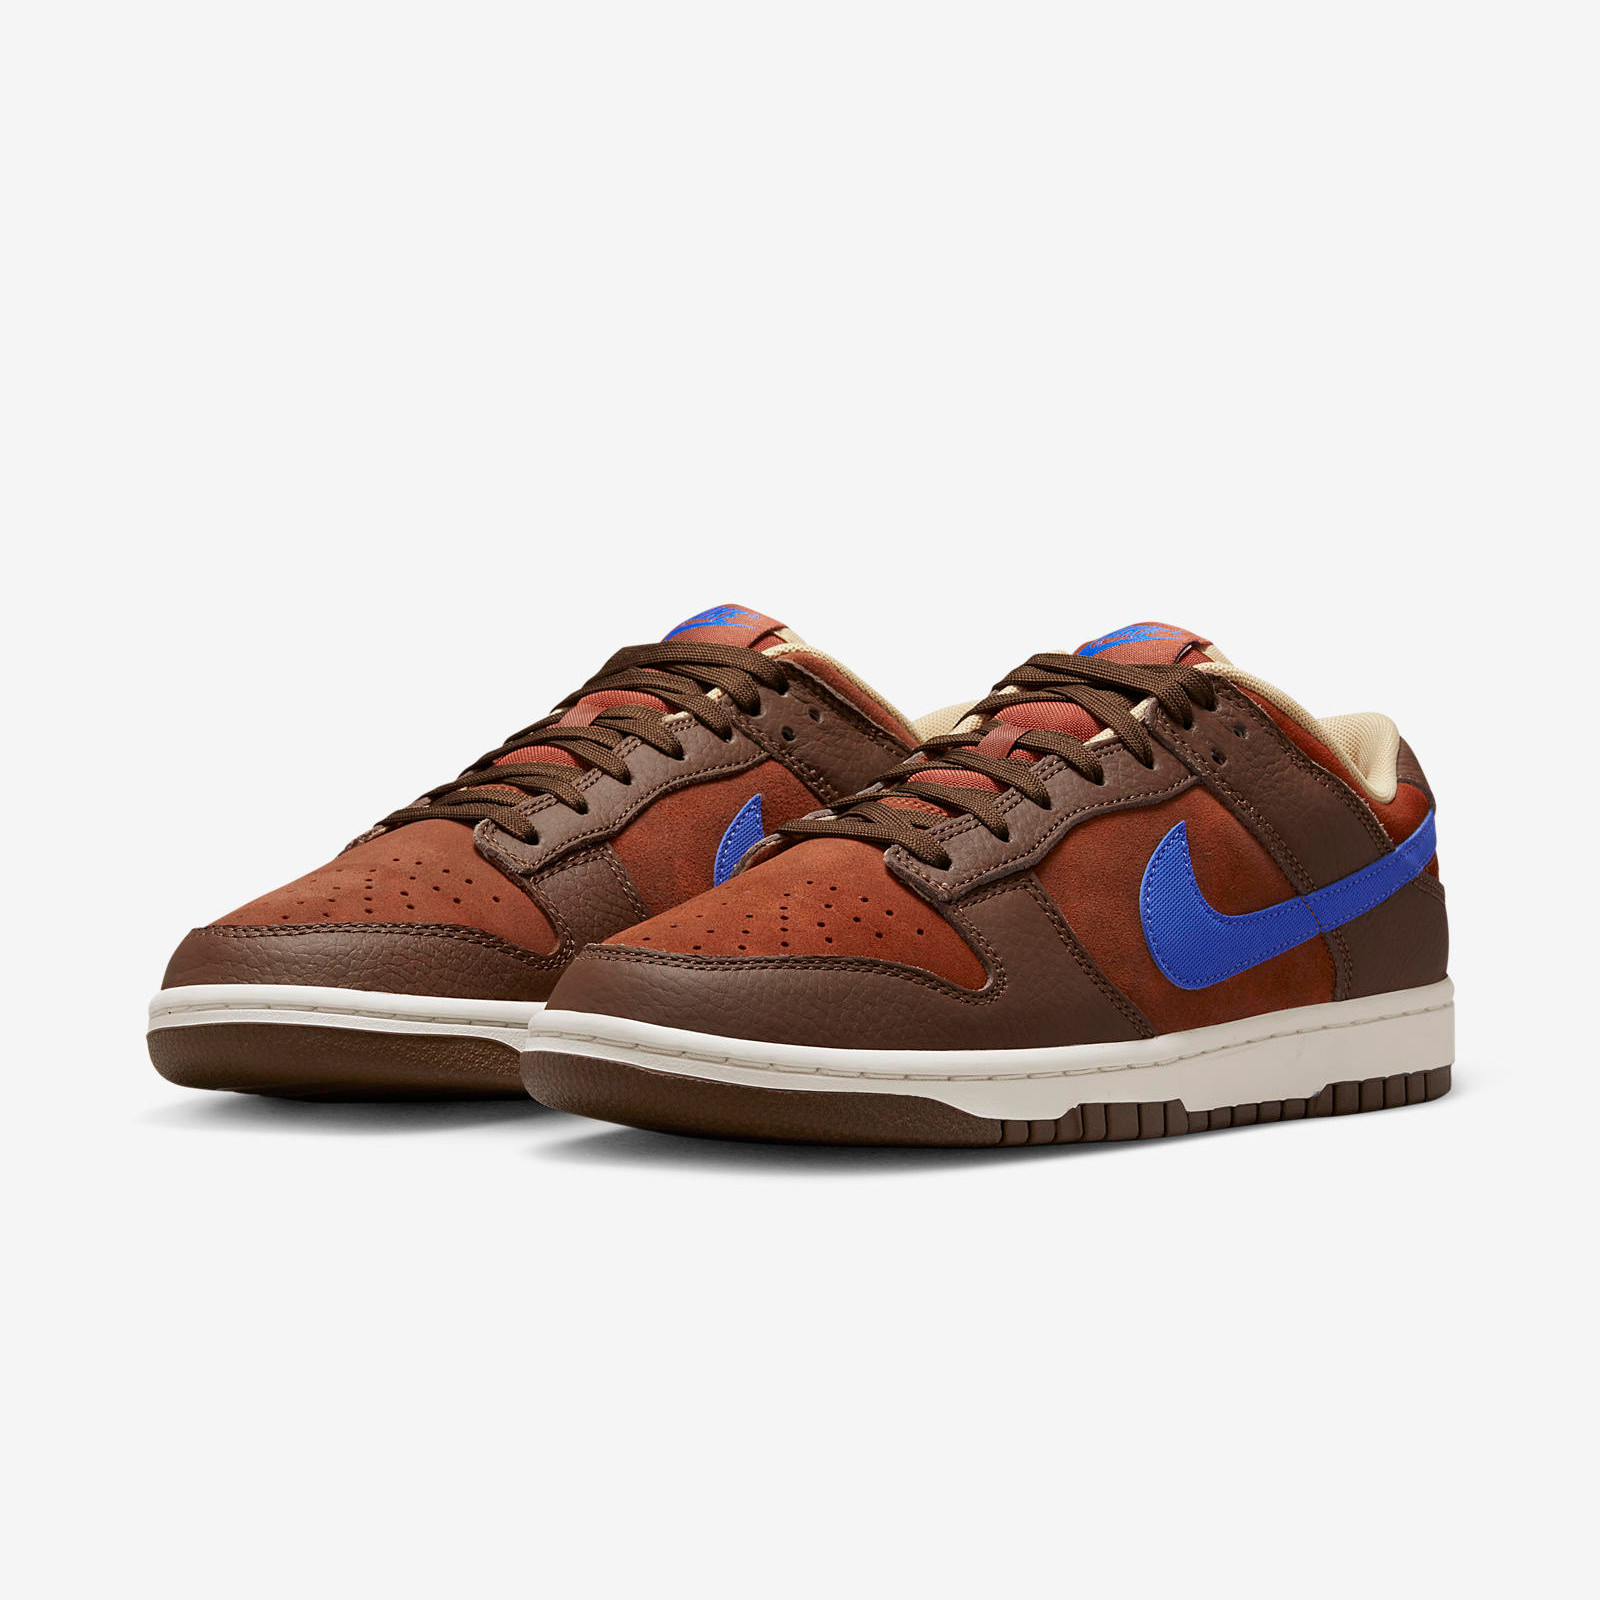 Nike Dunk Low
Cacao / Blue